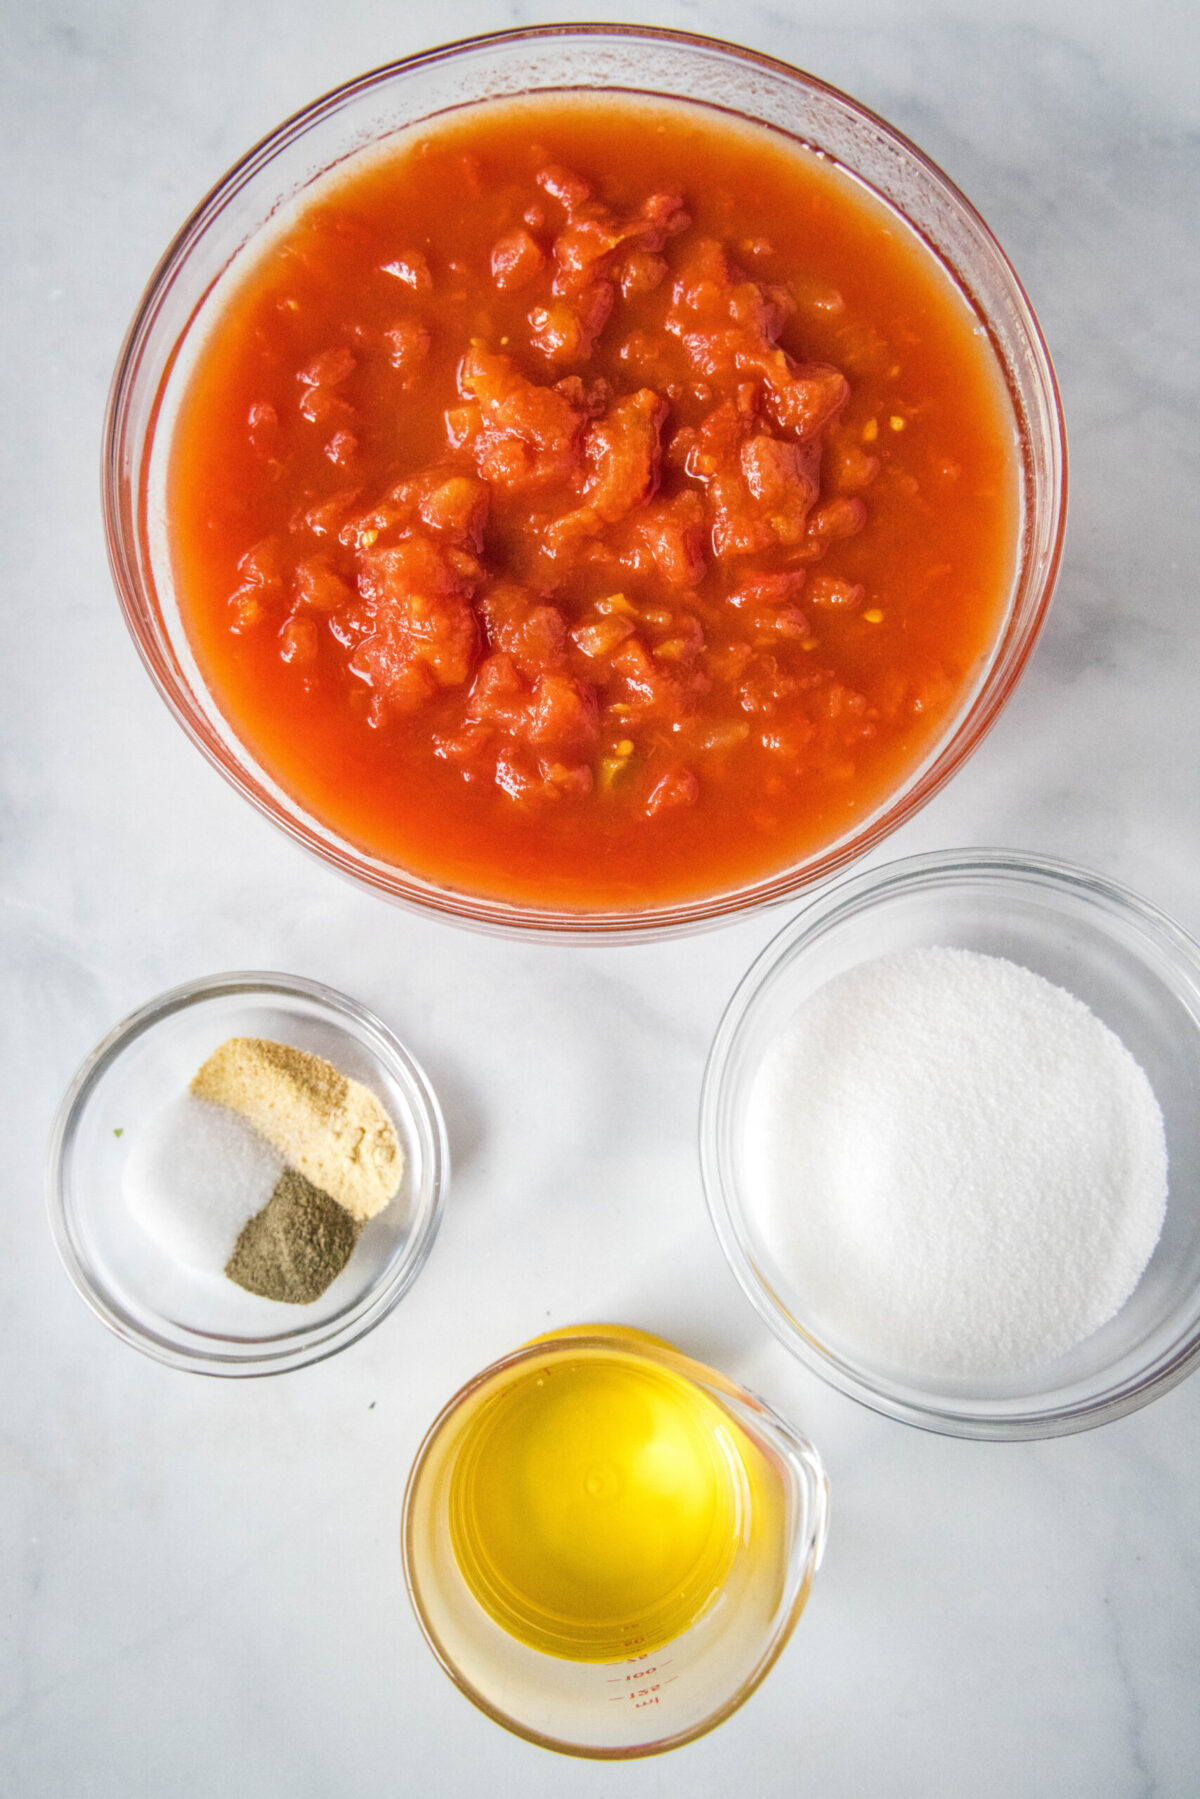 Overhead view of the ingredients needed for homemade ketchup: a bowl of canned tomatoes, a bowl of salt, pepper, onion powder, and garlic powder, a bowl of sugar, and a glass of vinegar